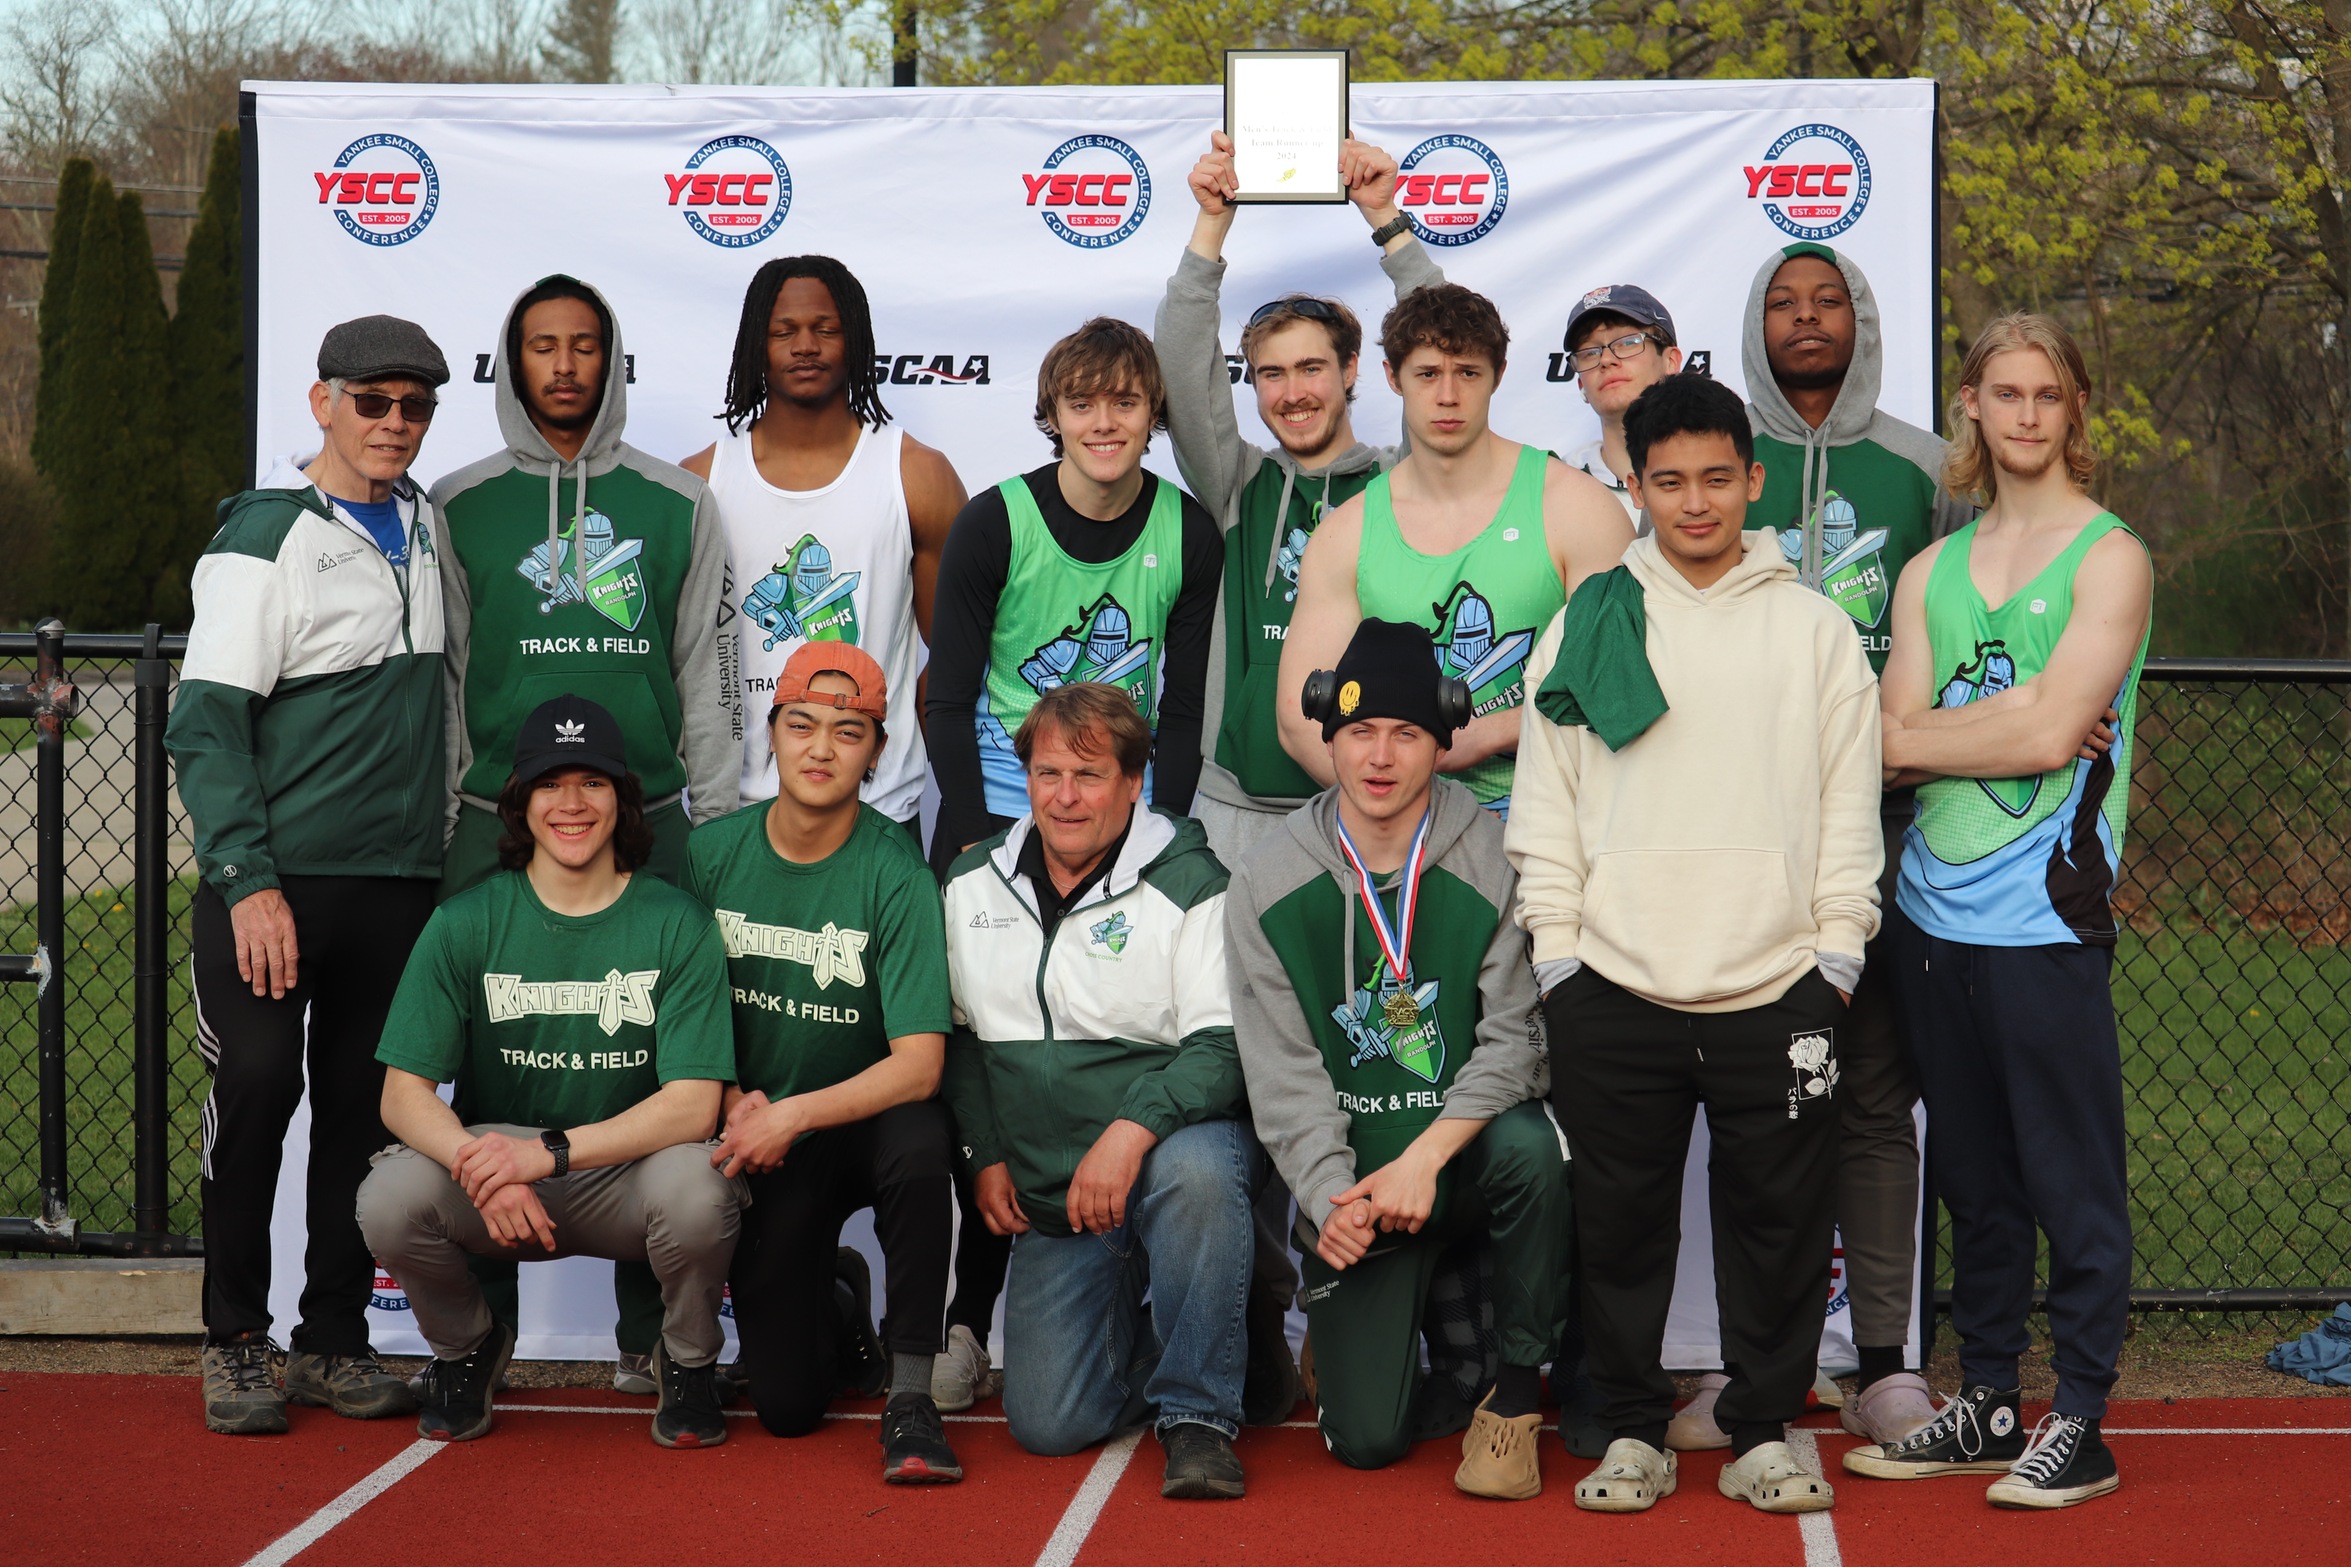 Knights Men's Track come out as runner up in YSCC Conference Championship